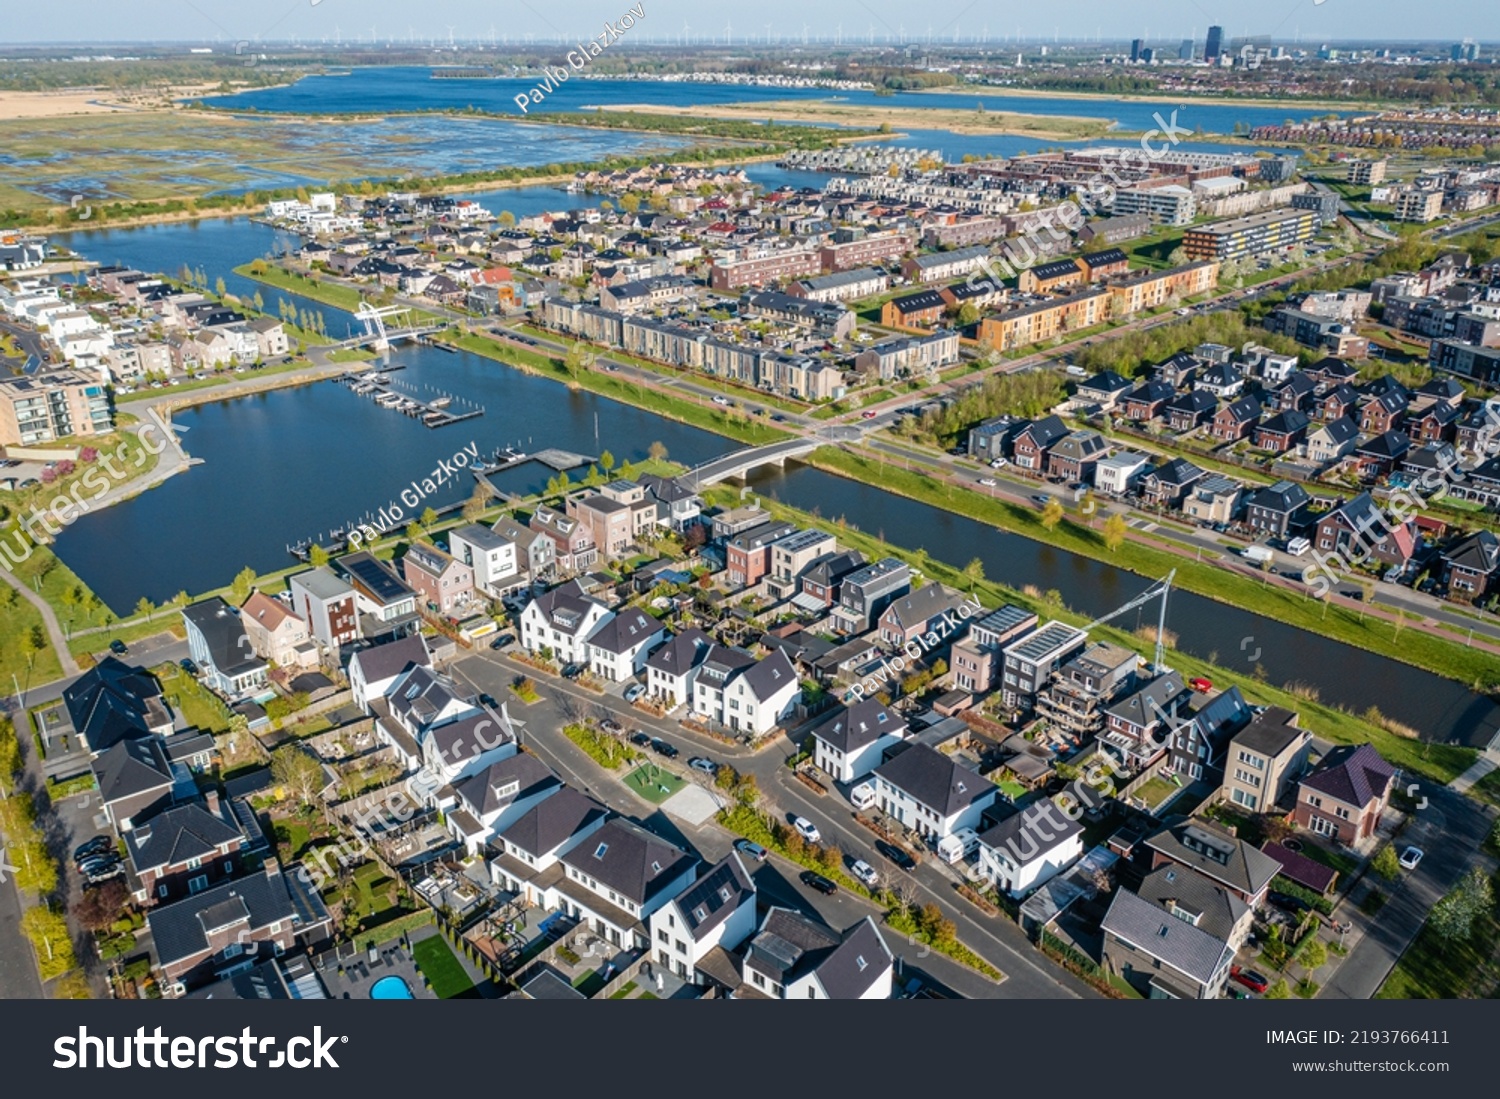 Modern green neighbourhood in Almere, The Netherlands, surrounded by water and nature, city built on reclaimed land (Flevoland polder). Aerial view. #2193766411